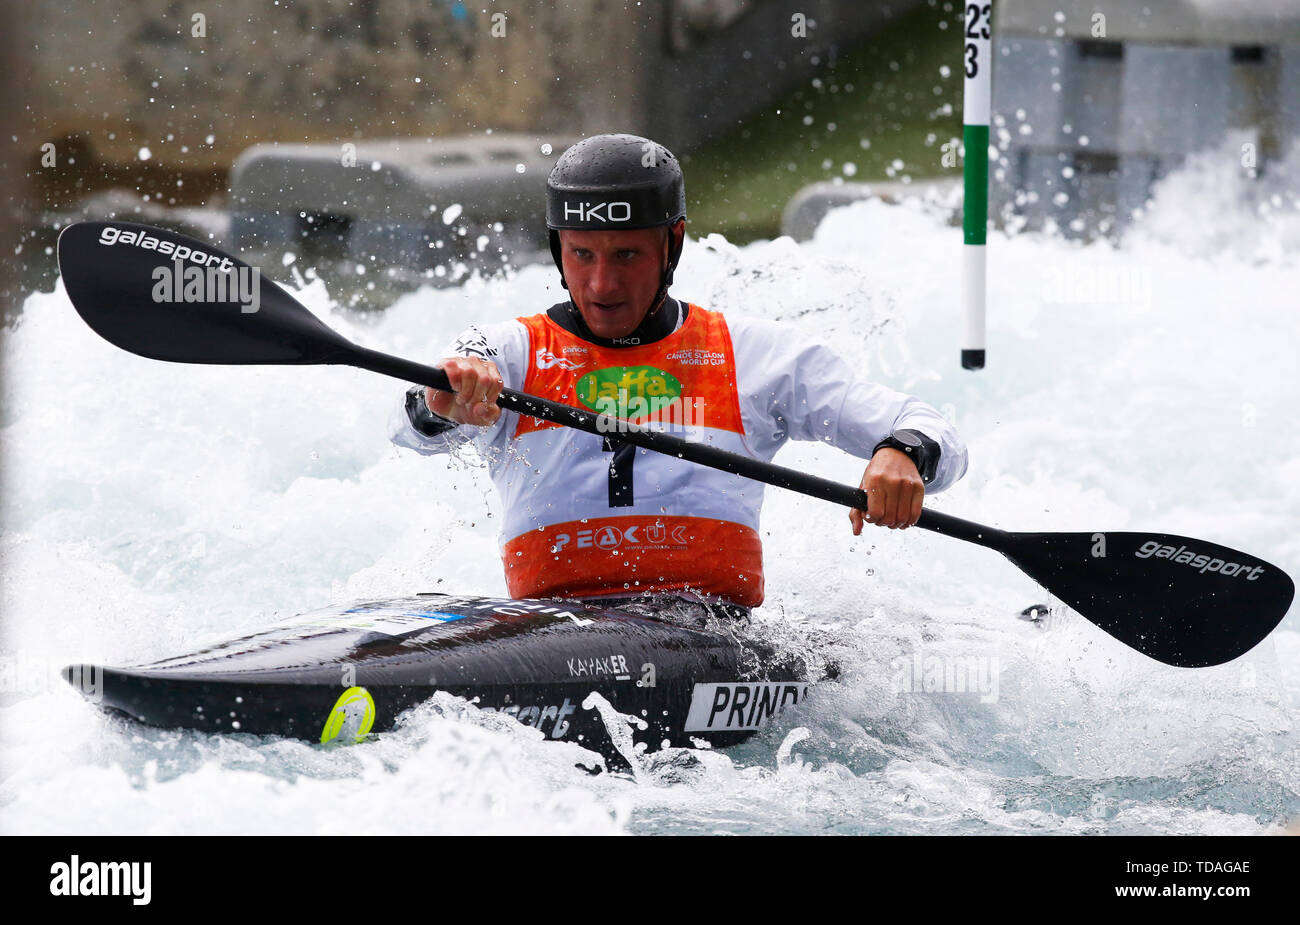 LONDON, ENGLAND JUNE 14  Vit Prindis (CZE) Compete in Men's Kayak 1st Heat Run during 2019 ICF Canoe Slalom World Cup 1 at the Lee Valley White Water Centre, London on 14 June 2019 Credit Action Foto Sport Stock Photo